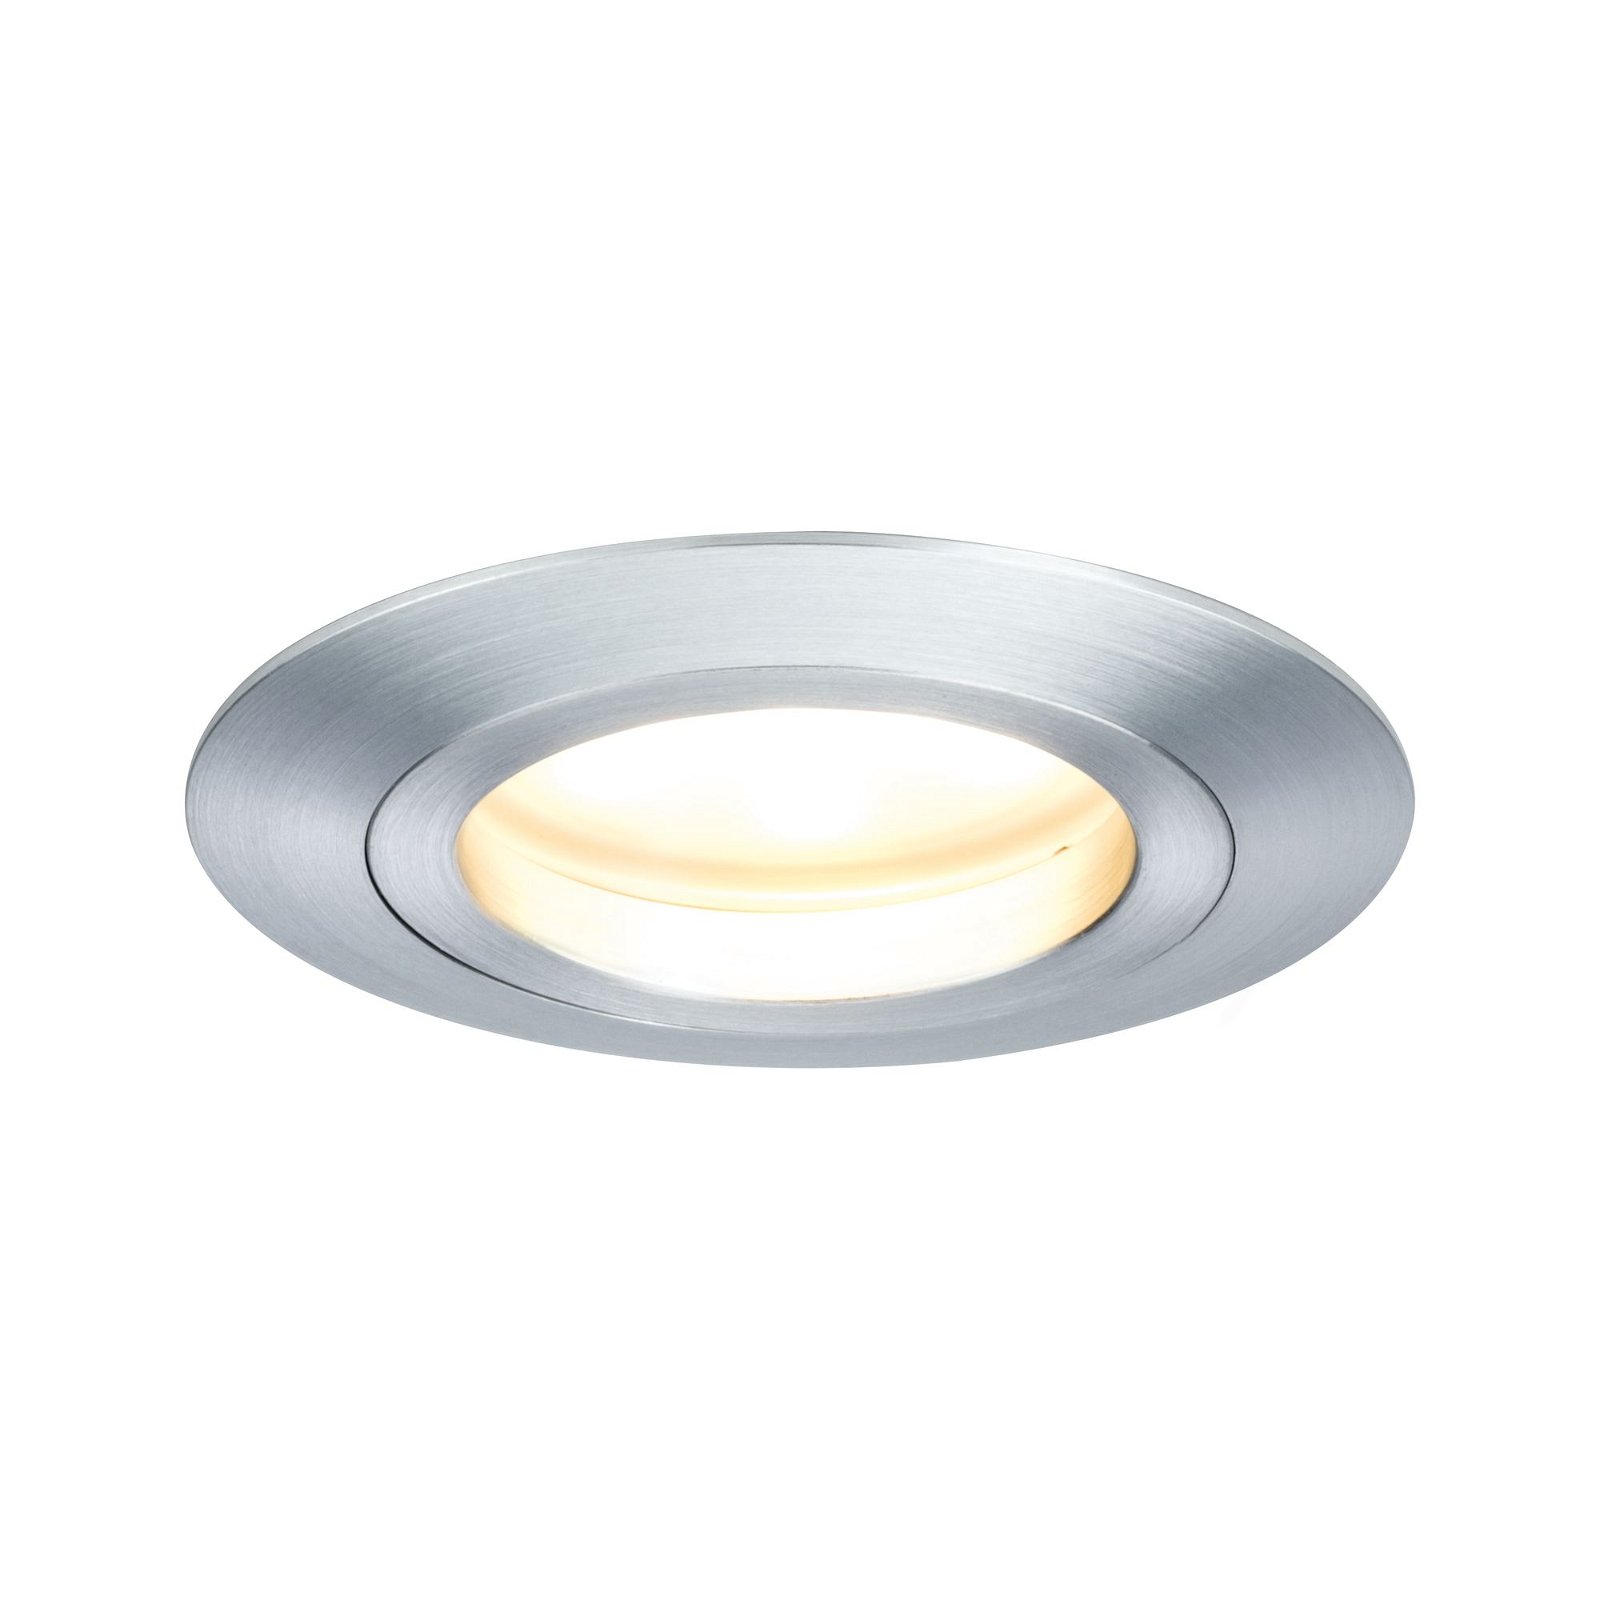 LED Recessed luminaire Warm white Single luminaire Rigid IP44 round 80mm Coin 7W 380lm 230V dimmable 2700K Turned aluminium/Satin